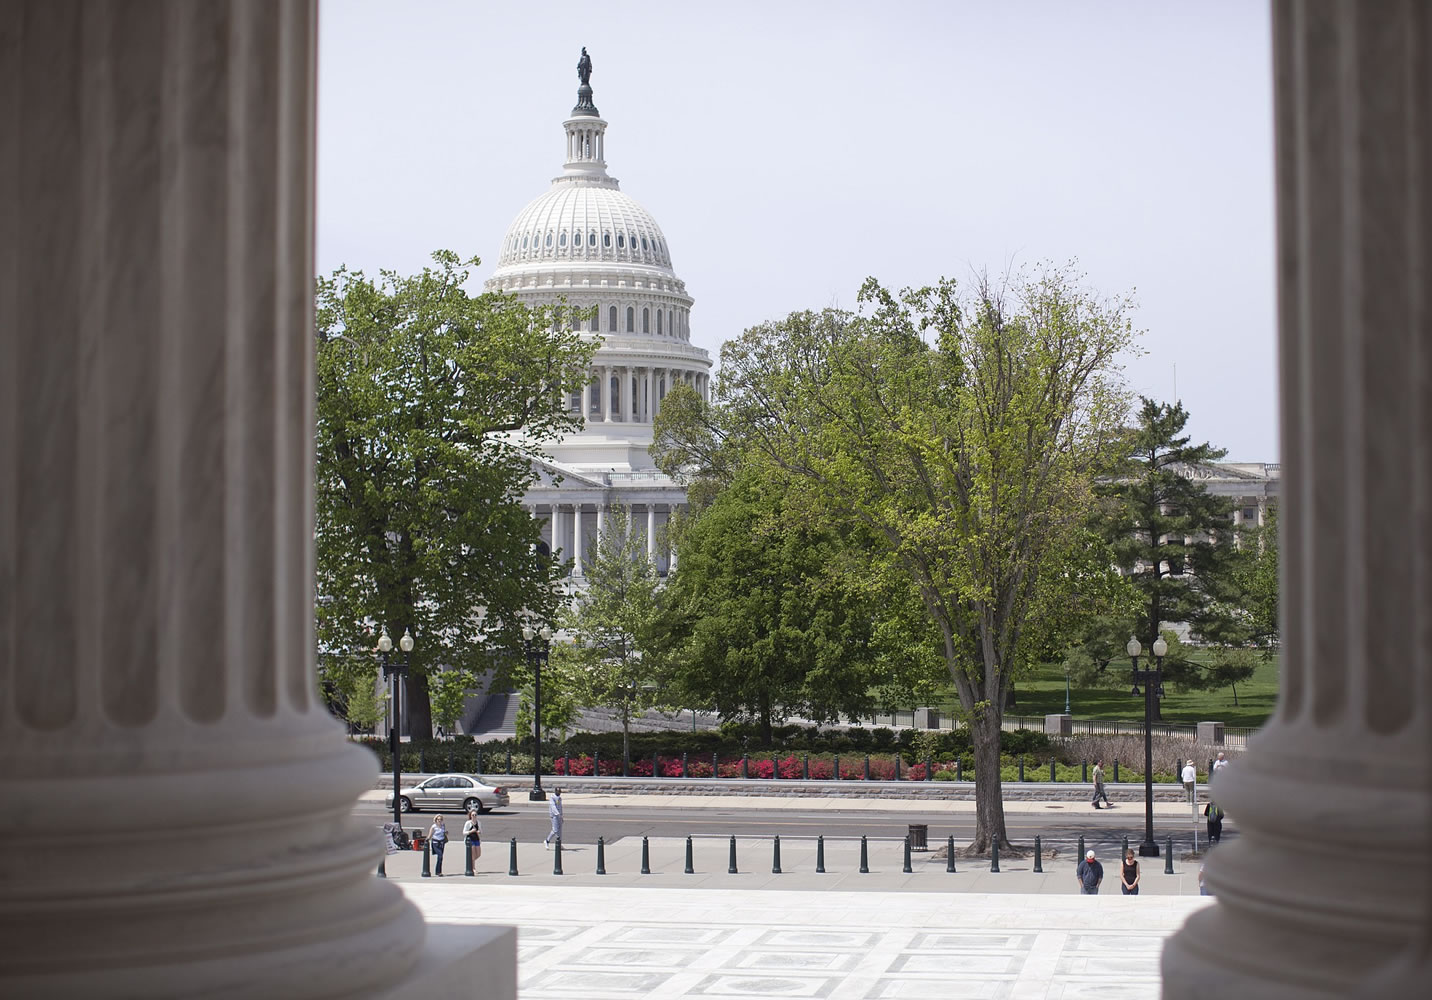 The U.S. Capitol building is seen through the columns on the steps of the Supreme Court in Washington in May. The House approved a bill that would temporarily patch over a multibillion-dollar pothole in federal highway and transit programs while ducking the issue of how to put the programs on sound financial footing for the long term.